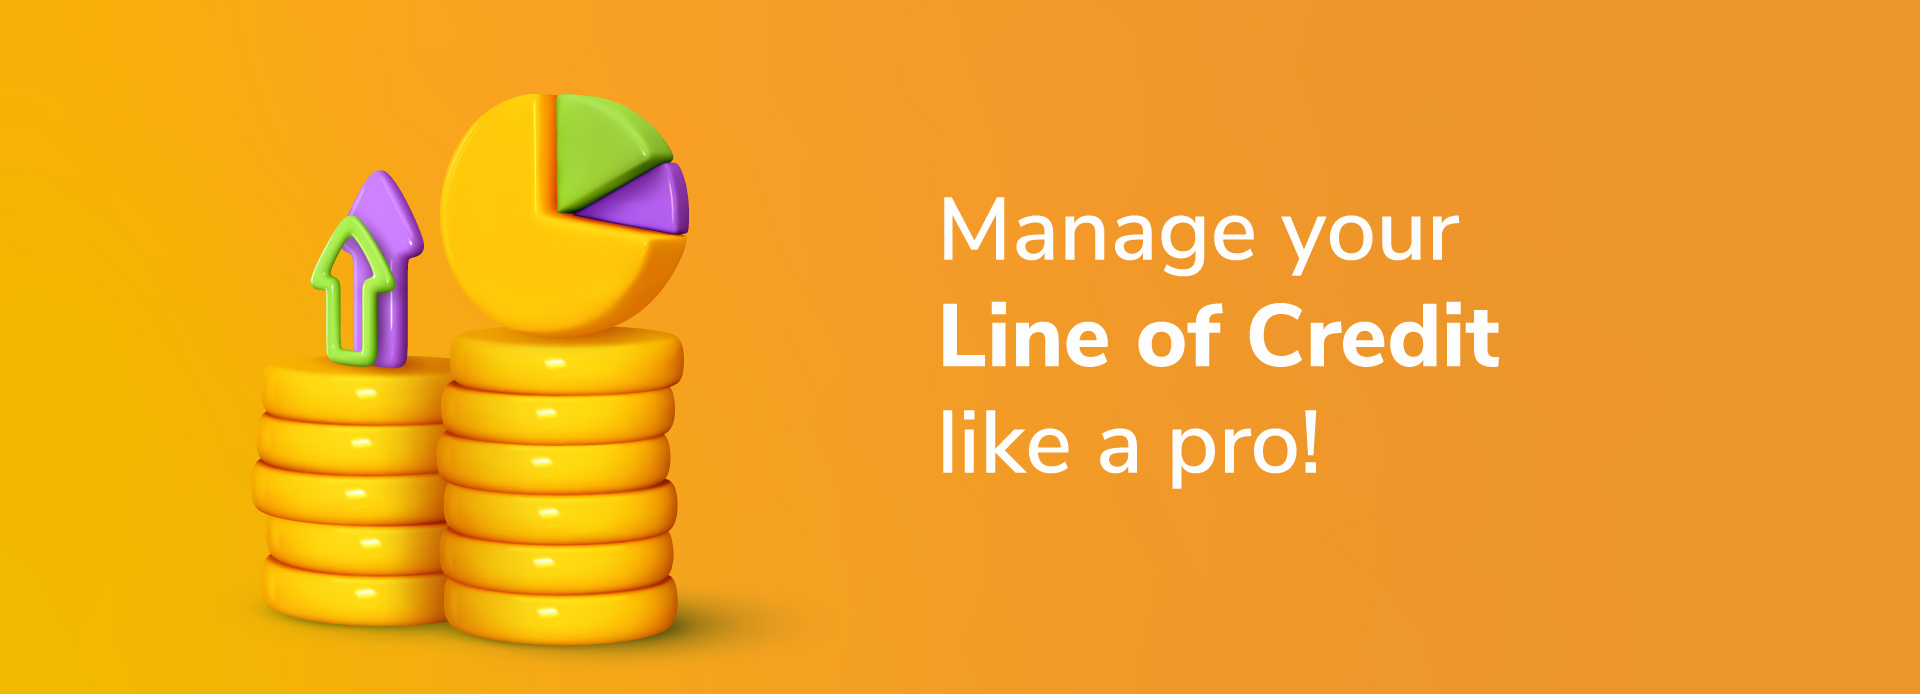 6 Tips to Manage Your Line of Credit Like A Pro 